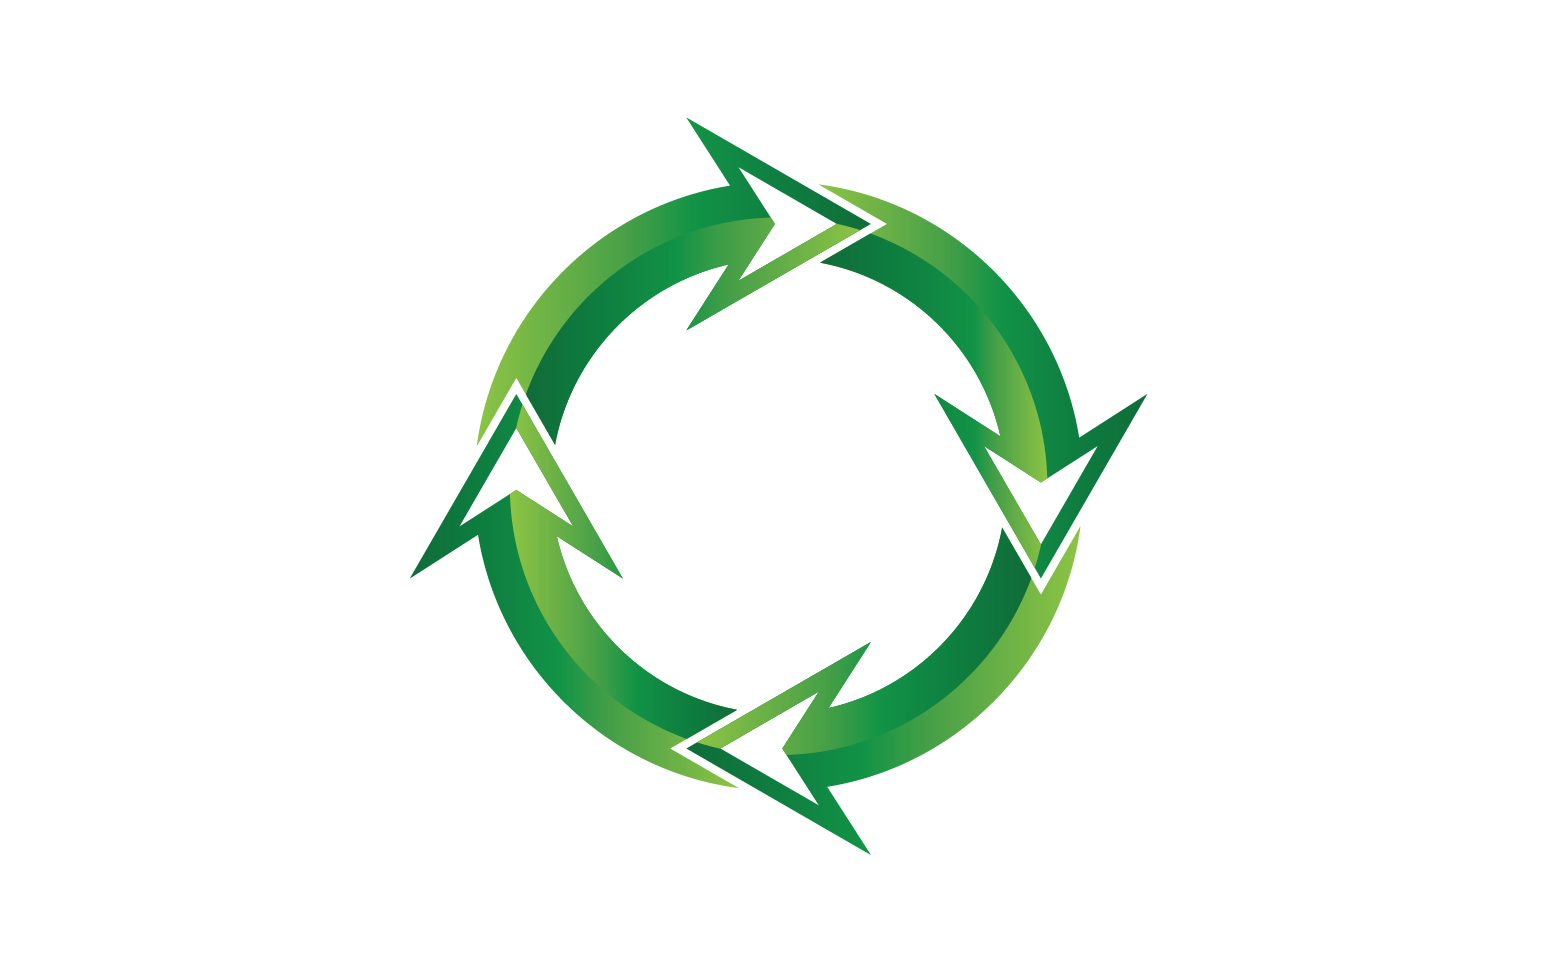 Recycle Symbol isolated on a white background v3